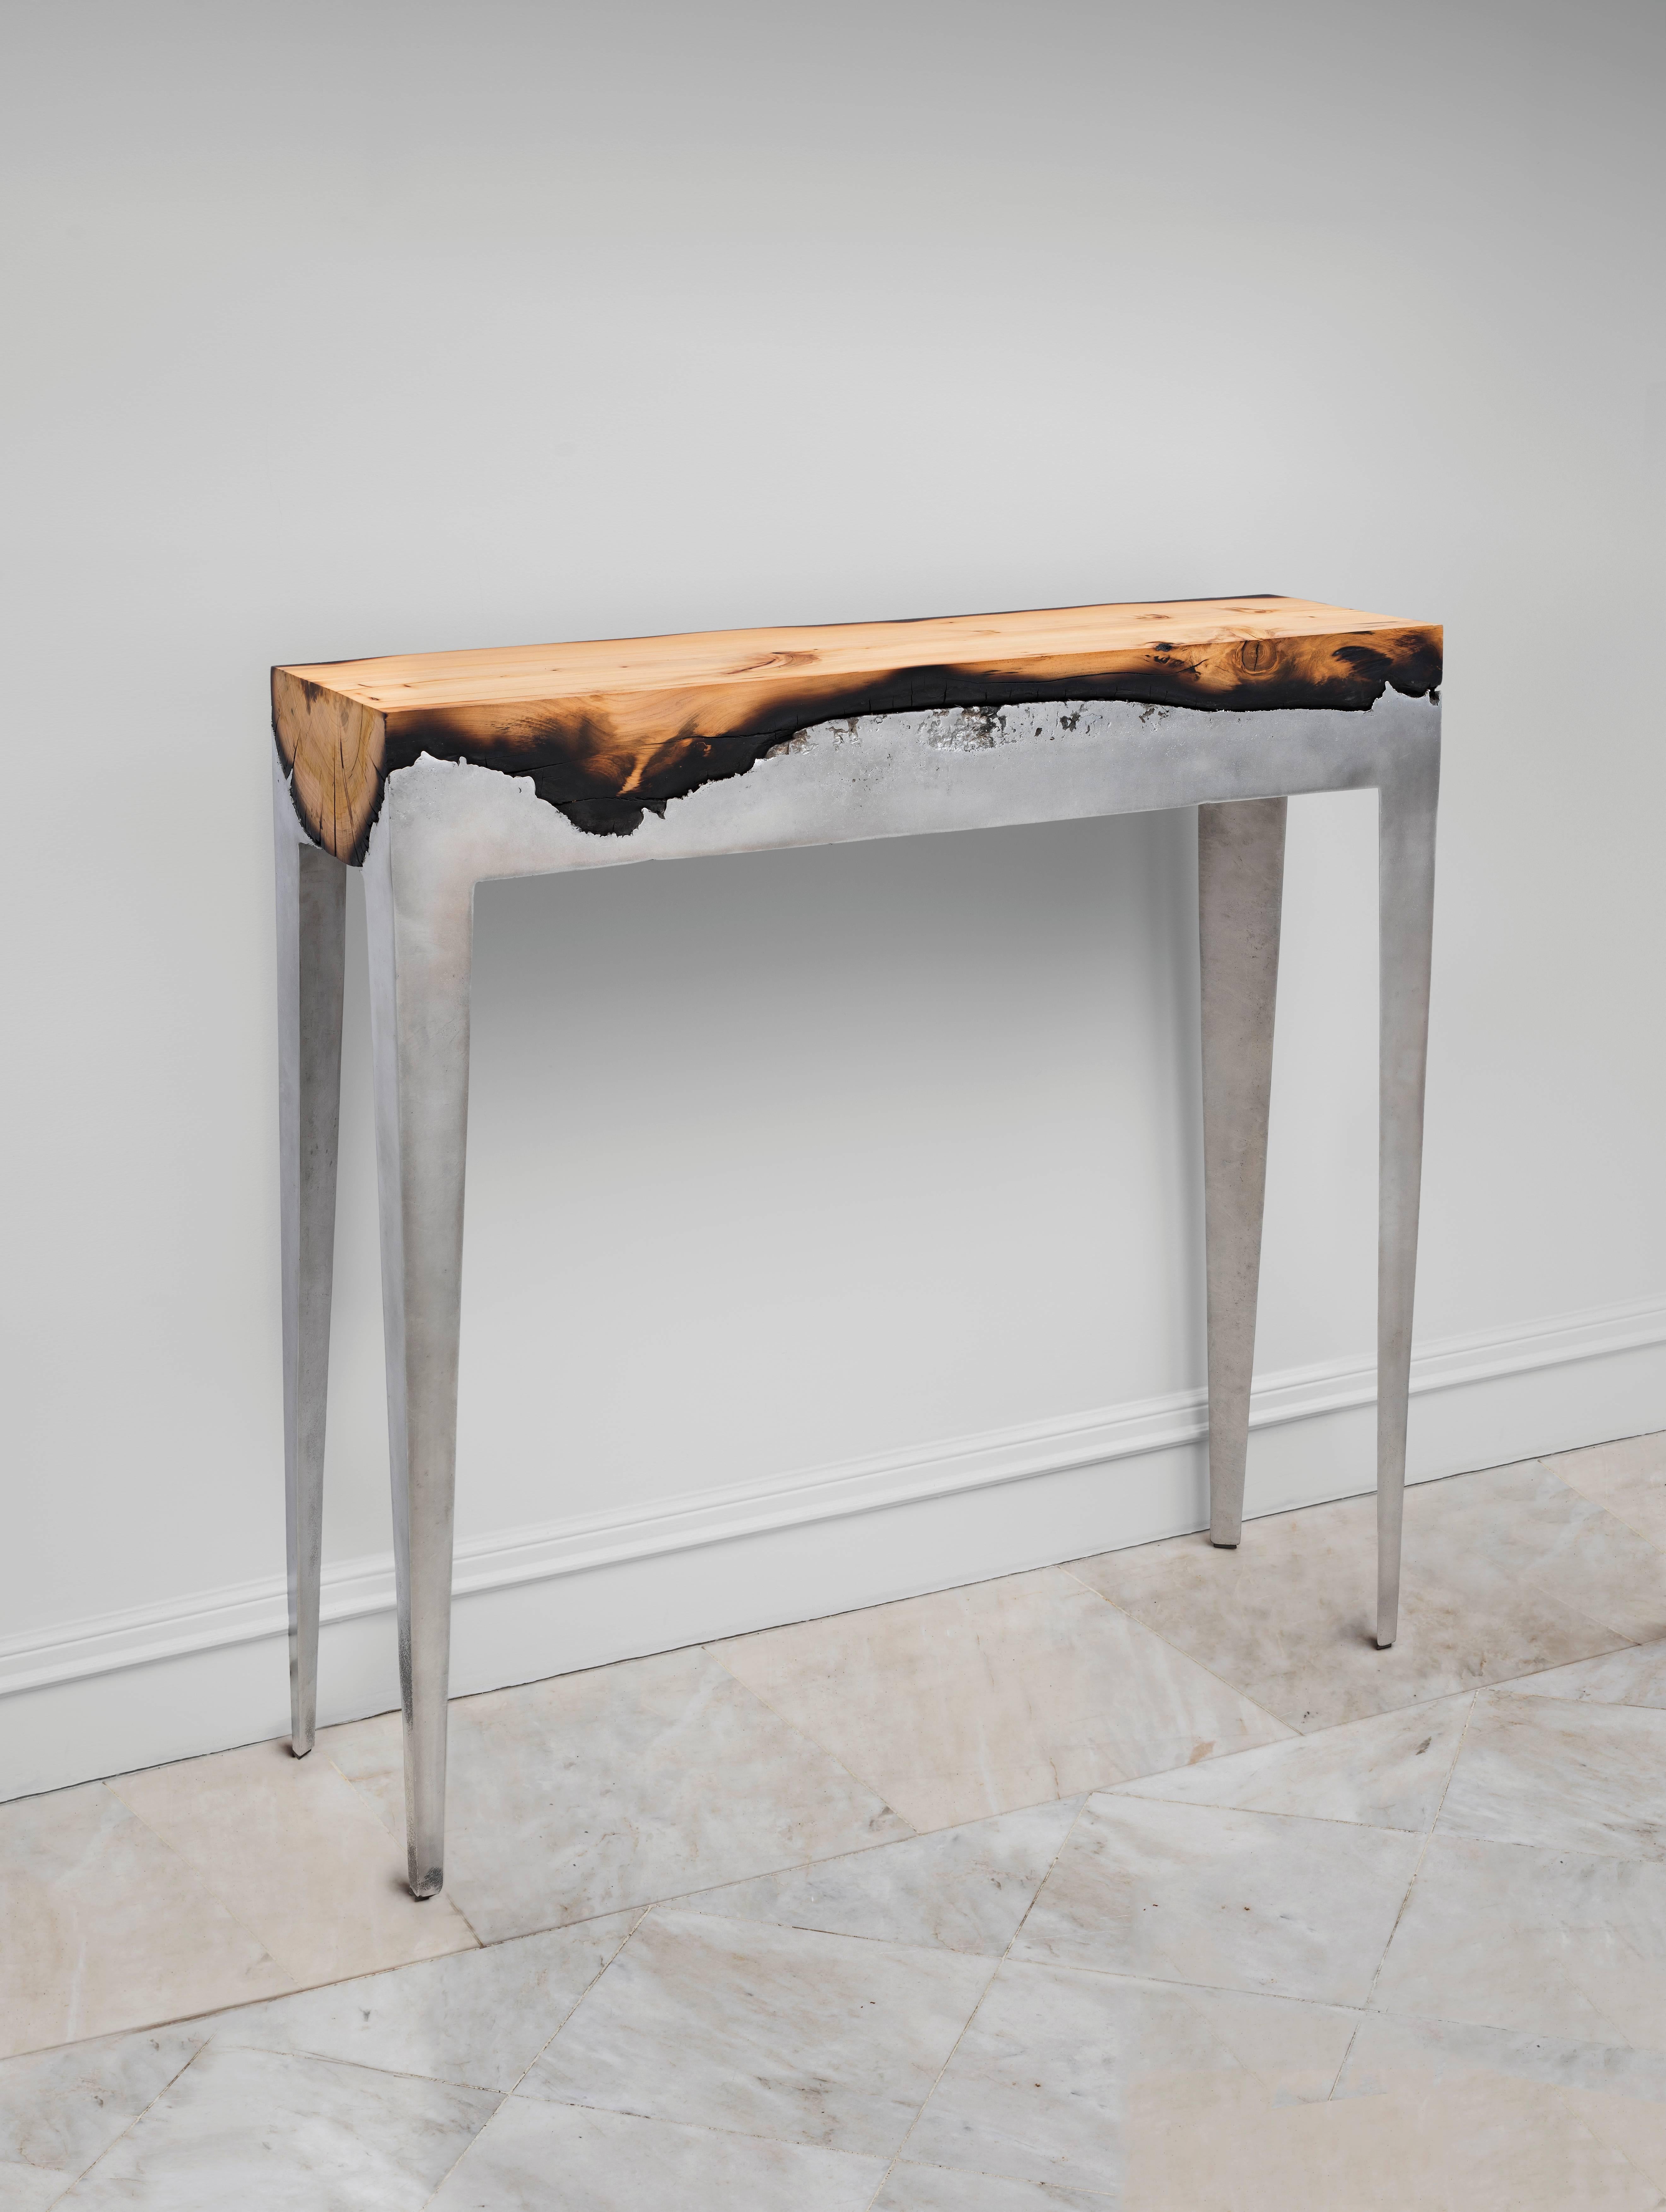 Hilla Shamia Design Studio:
Hilla Shamia has the IP rights on a method of the creation of unique art or furniture combining cast aluminum and wood: Wood CastingTM. 2015.